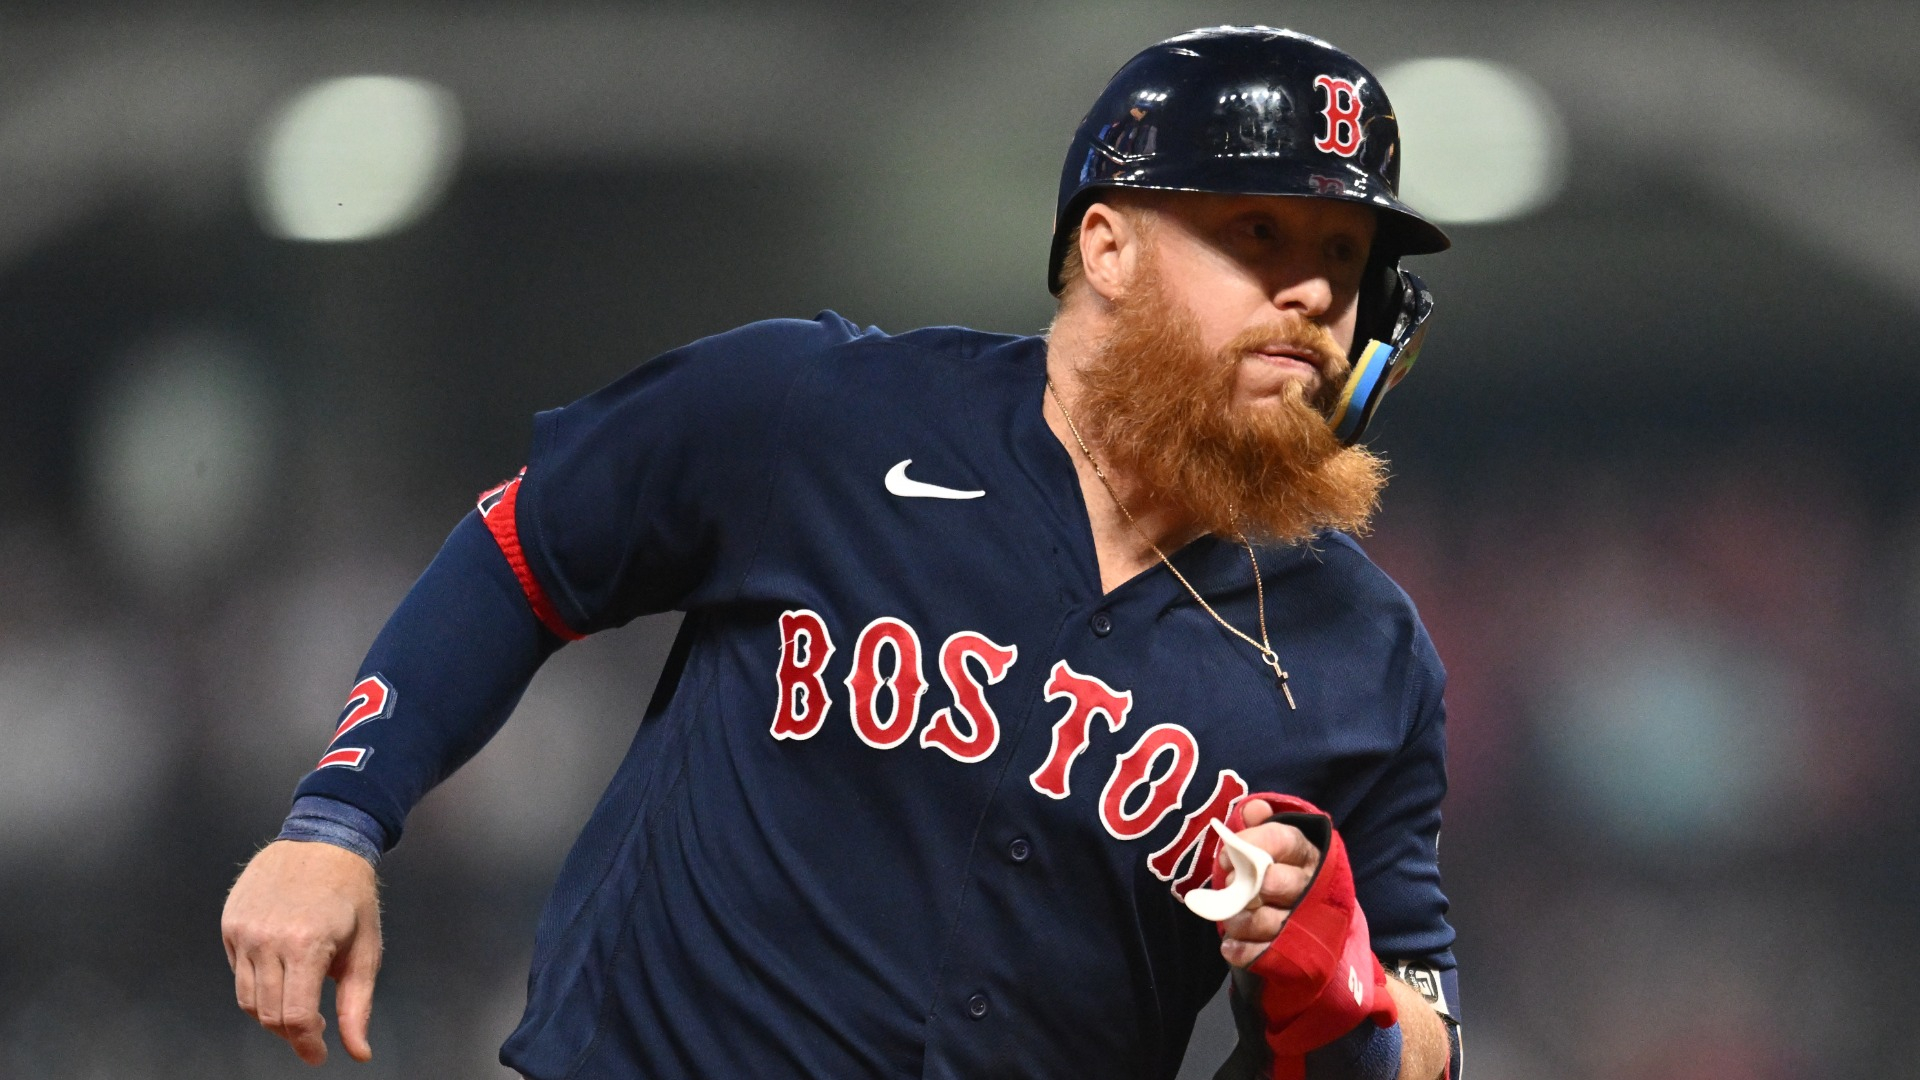 A view of the jersey of Justin Turner of the Boston Red Sox during